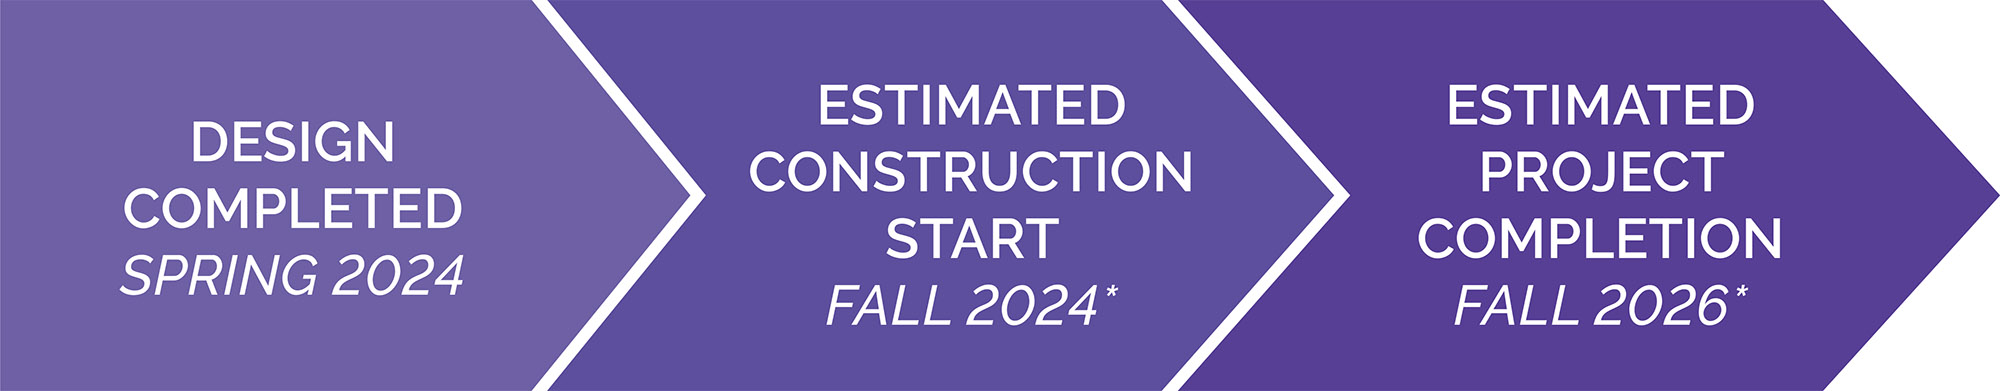 Design completed Spring 2024, estimated construction start Fall 2024, estimated project completion Fall 2026.